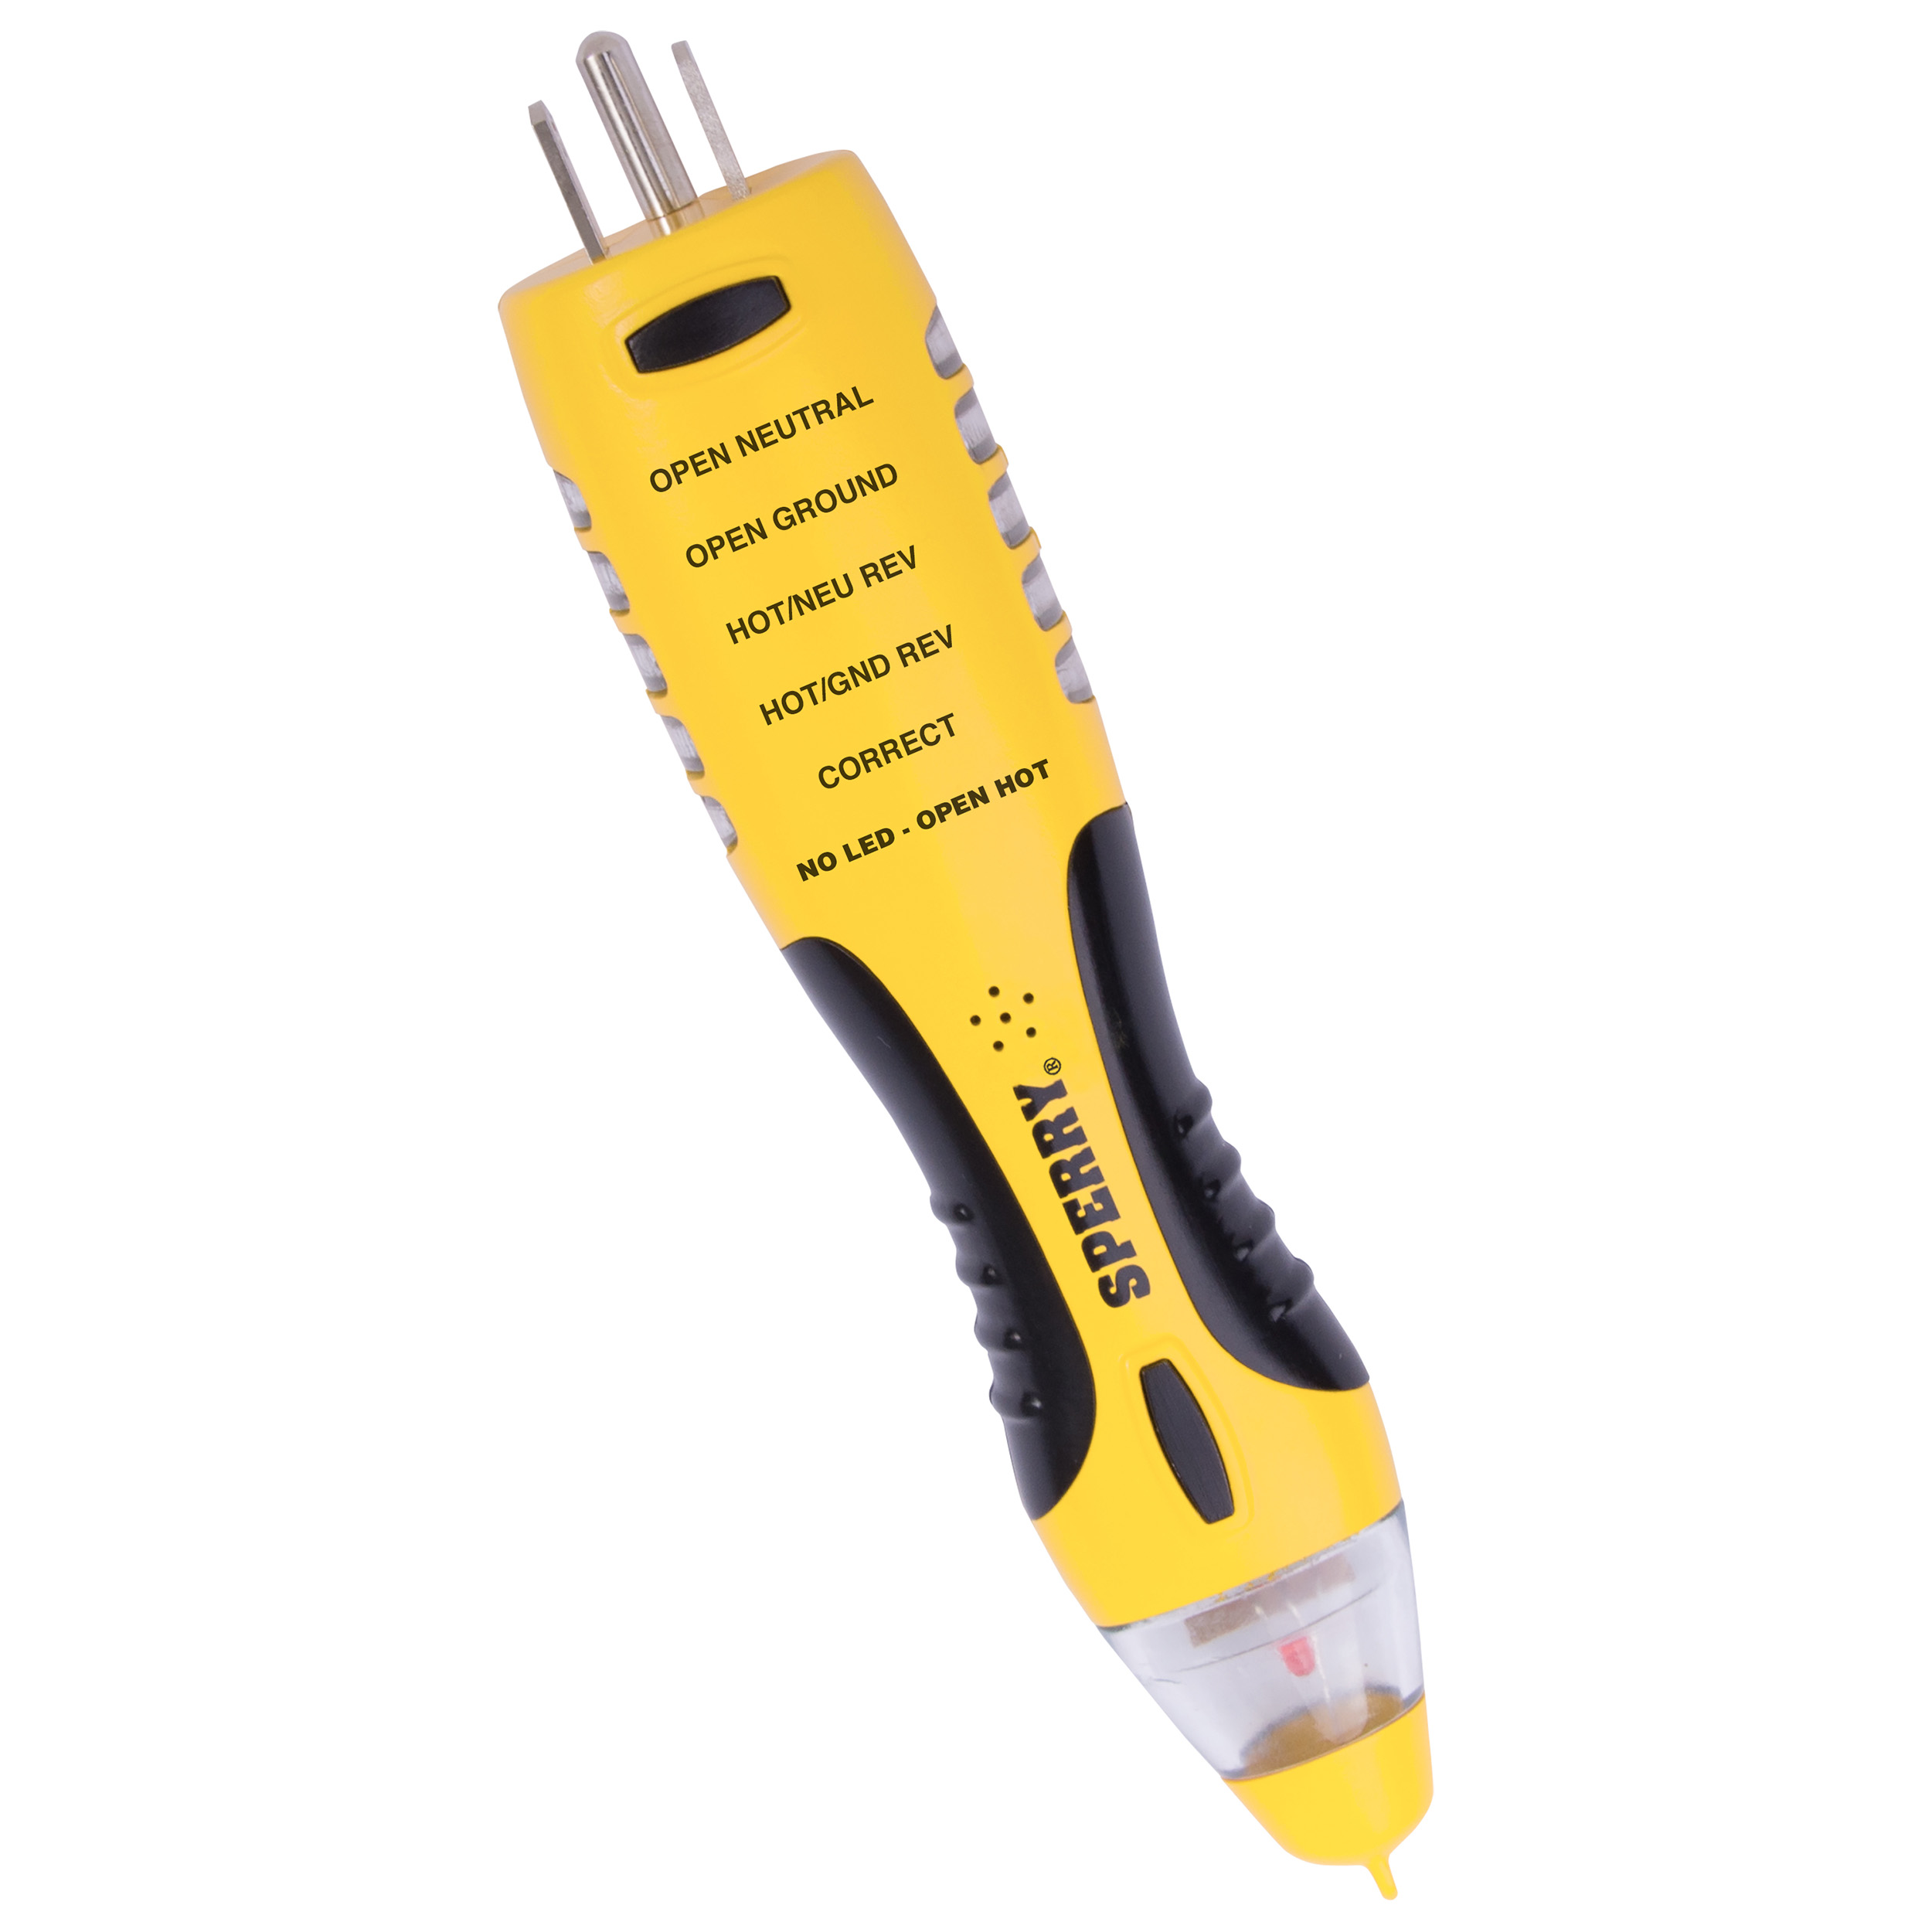 Crush Rating Sperry Instruments VD7504GFI DualCheck 2-in-1 Non-Contact Voltage Detector GFCI Outlet Circuit Analyzer 250 lb Fivе Расk 50-1000V AC 360° Visual & Audible Indicators